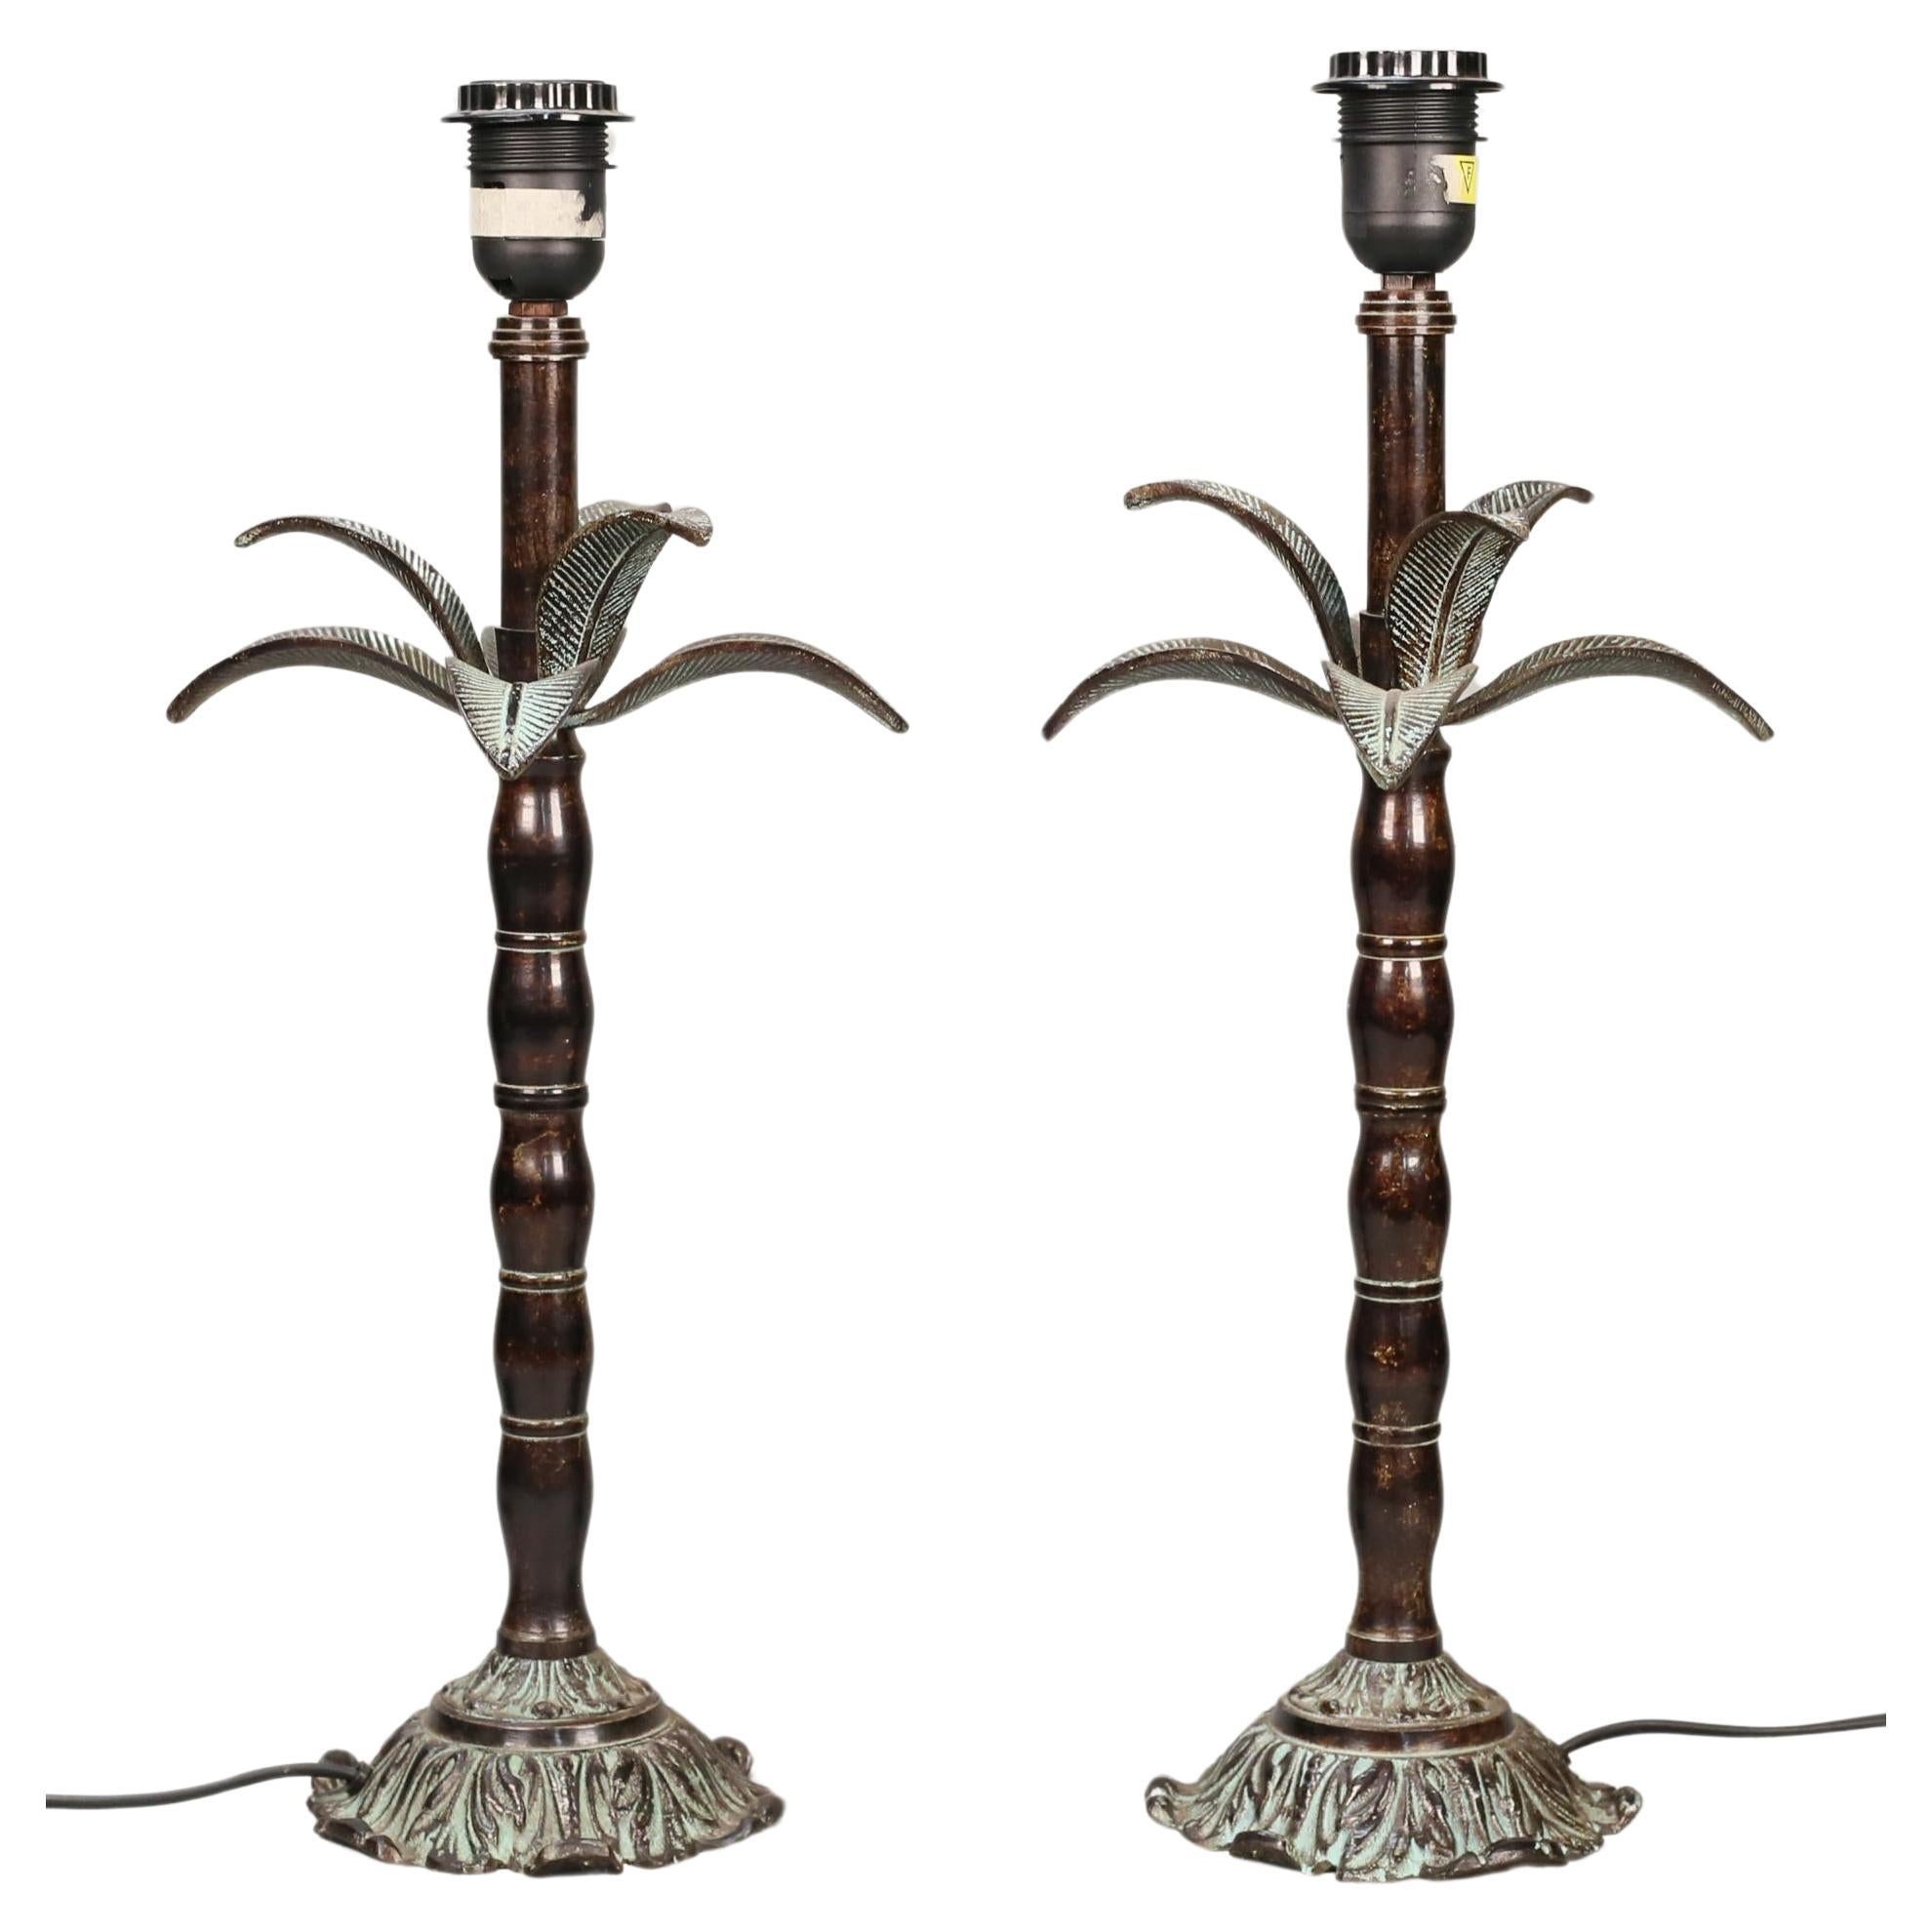 Pair of Bronze Palm Tree Stylized Accent Lamps with aged Verdigris details